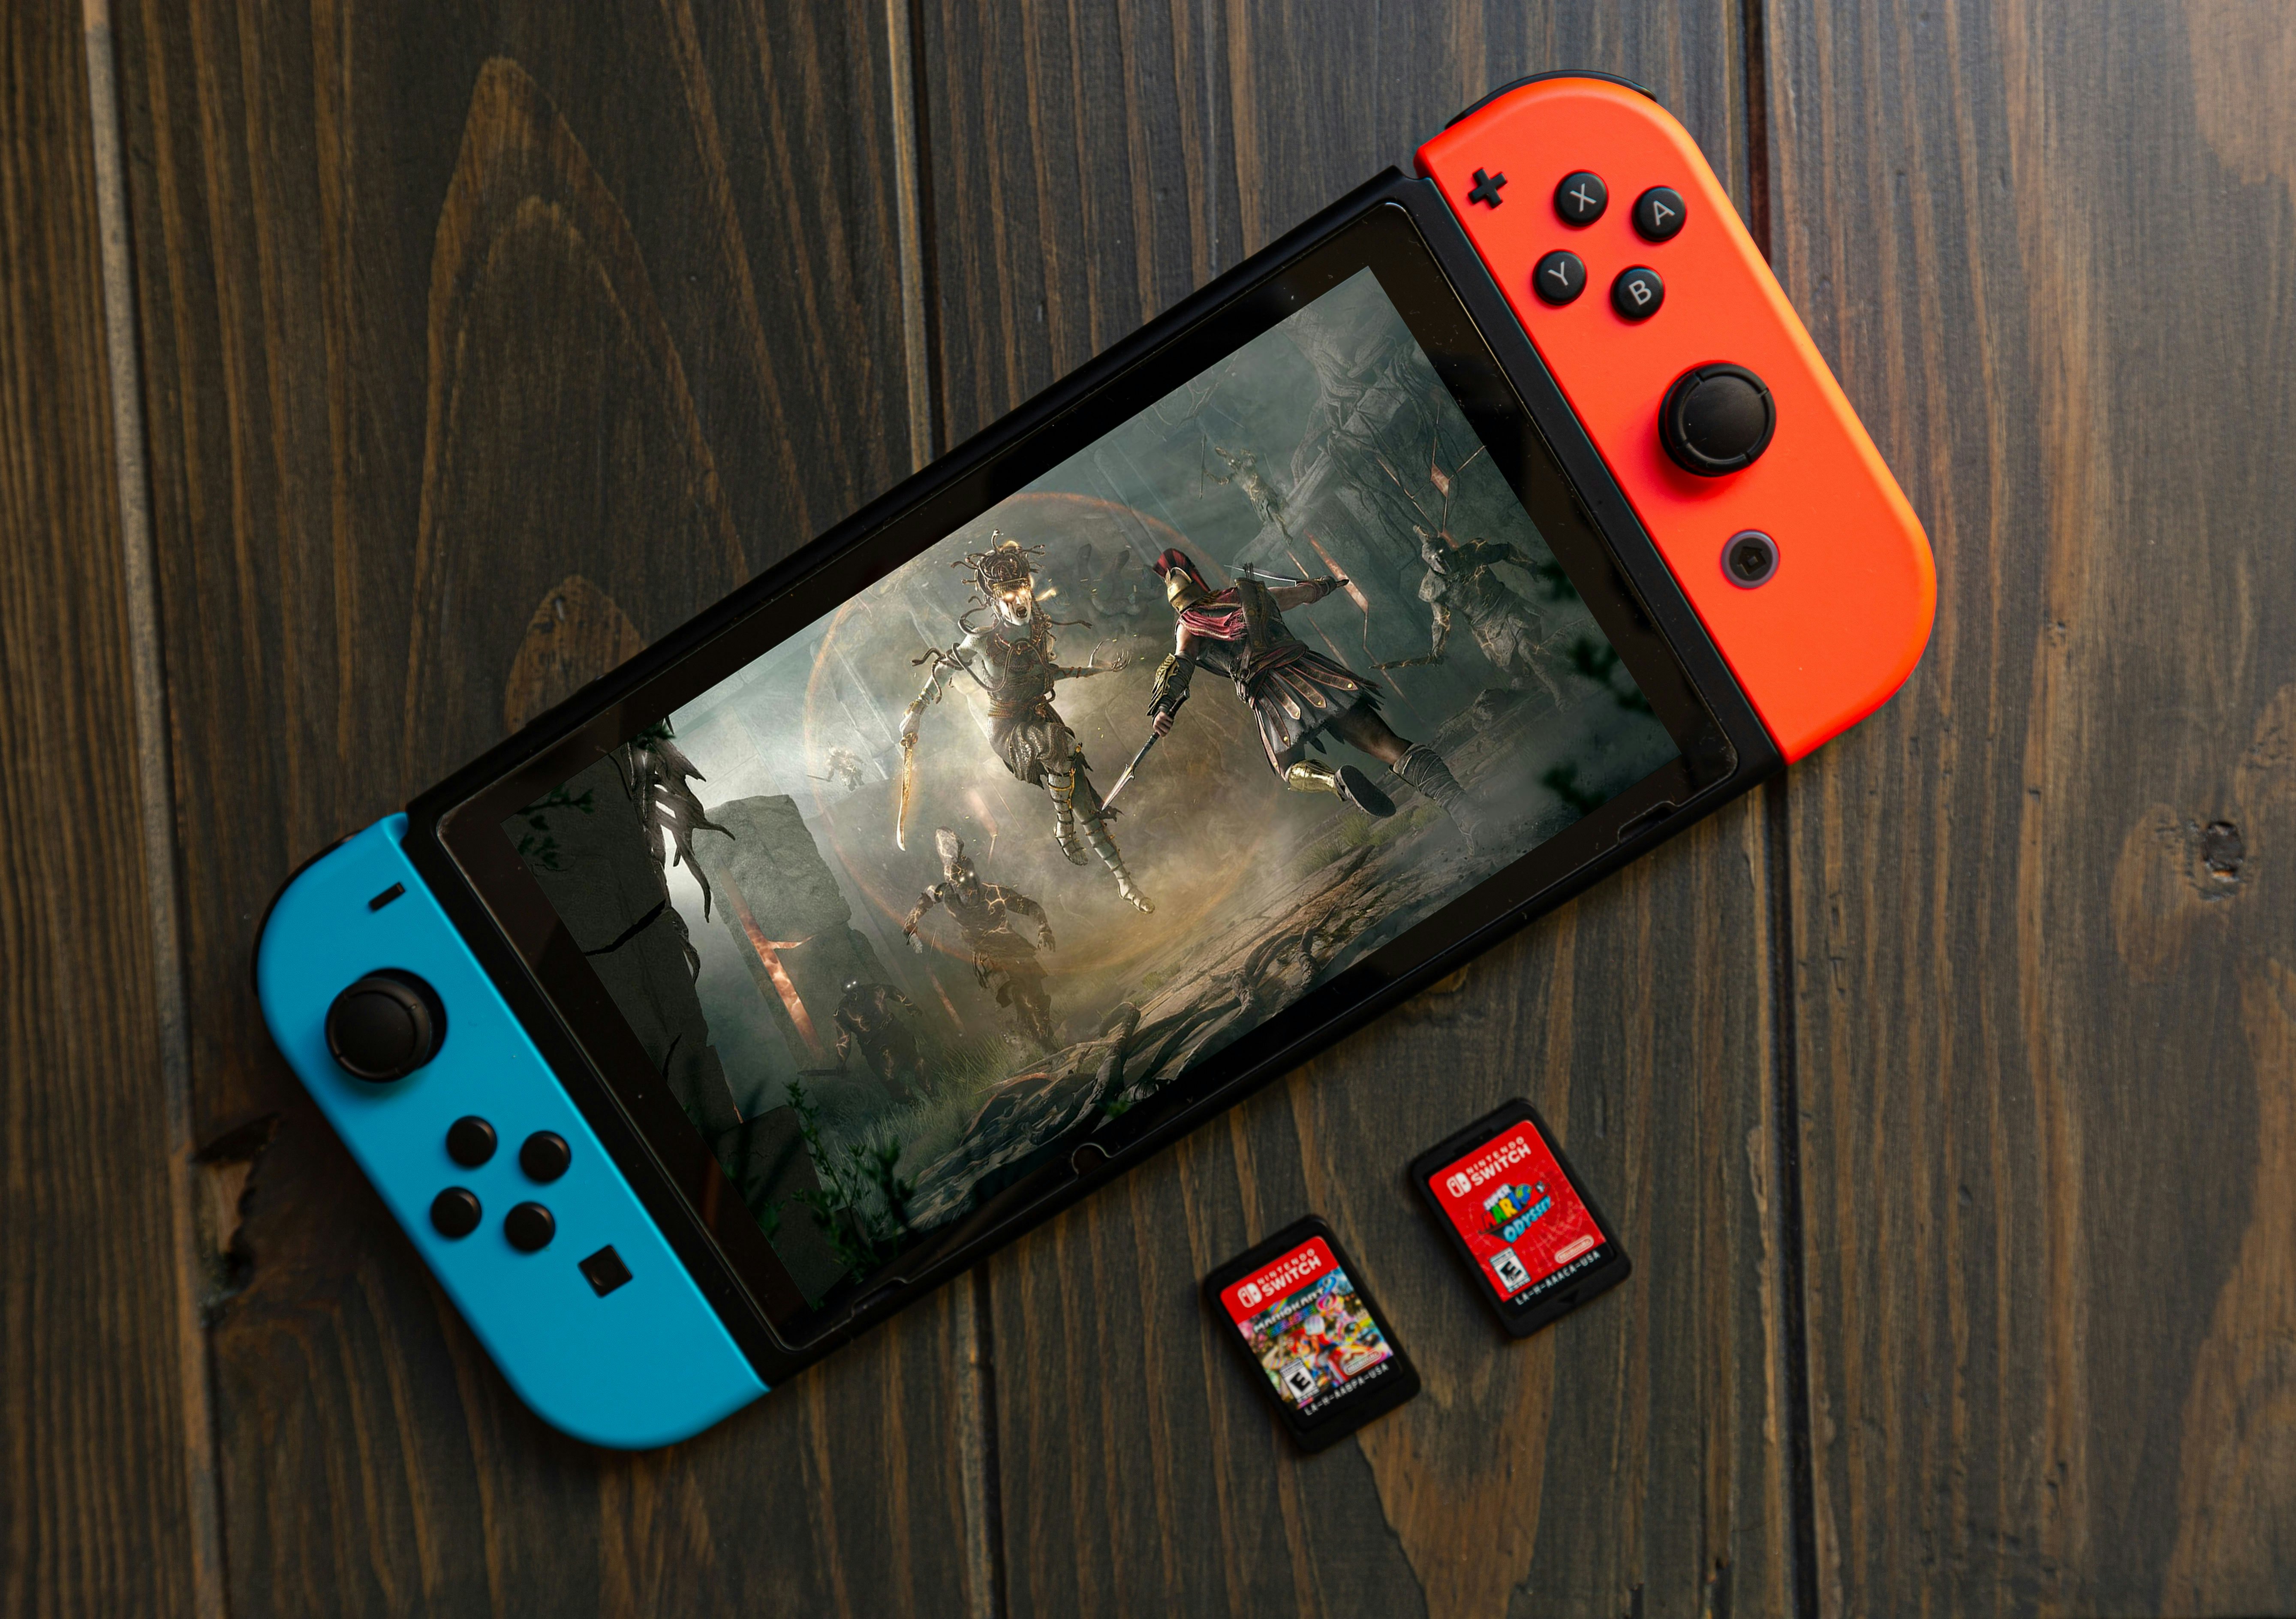 assassin's creed odyssey switch